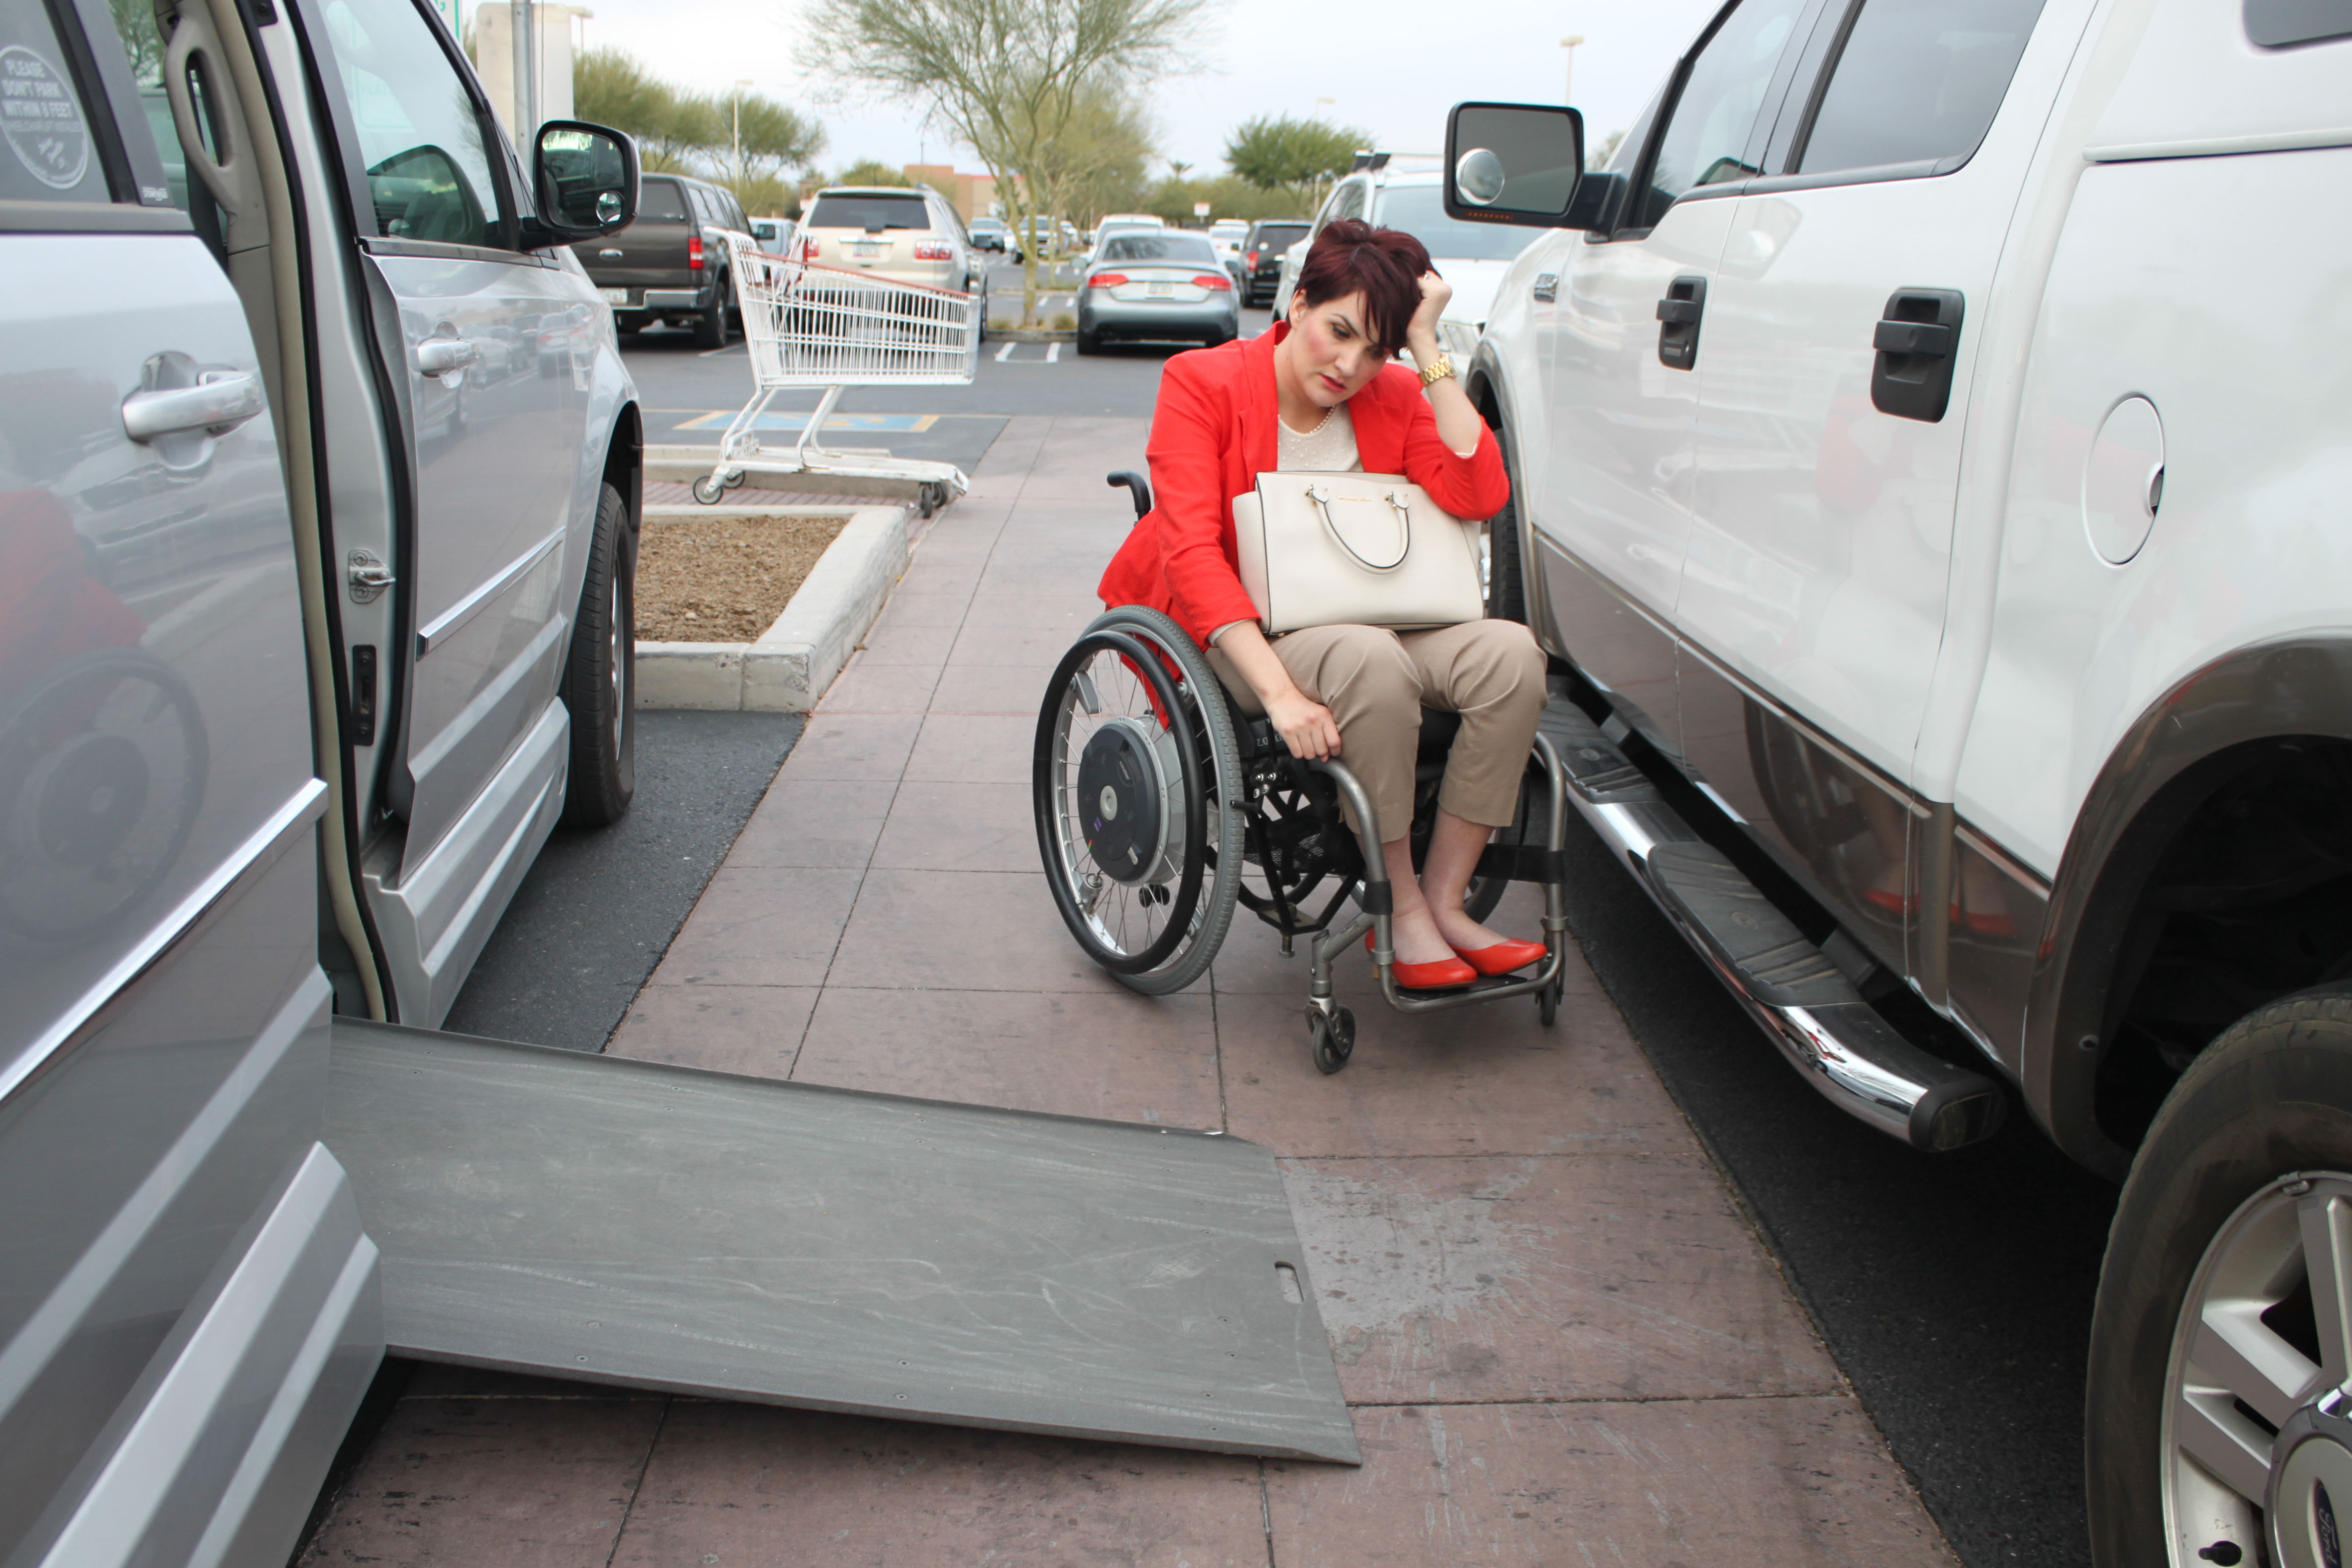 PL ESFFFDV original - ASK PUSHLiving: What to do if you see someone abusing handicap parking?